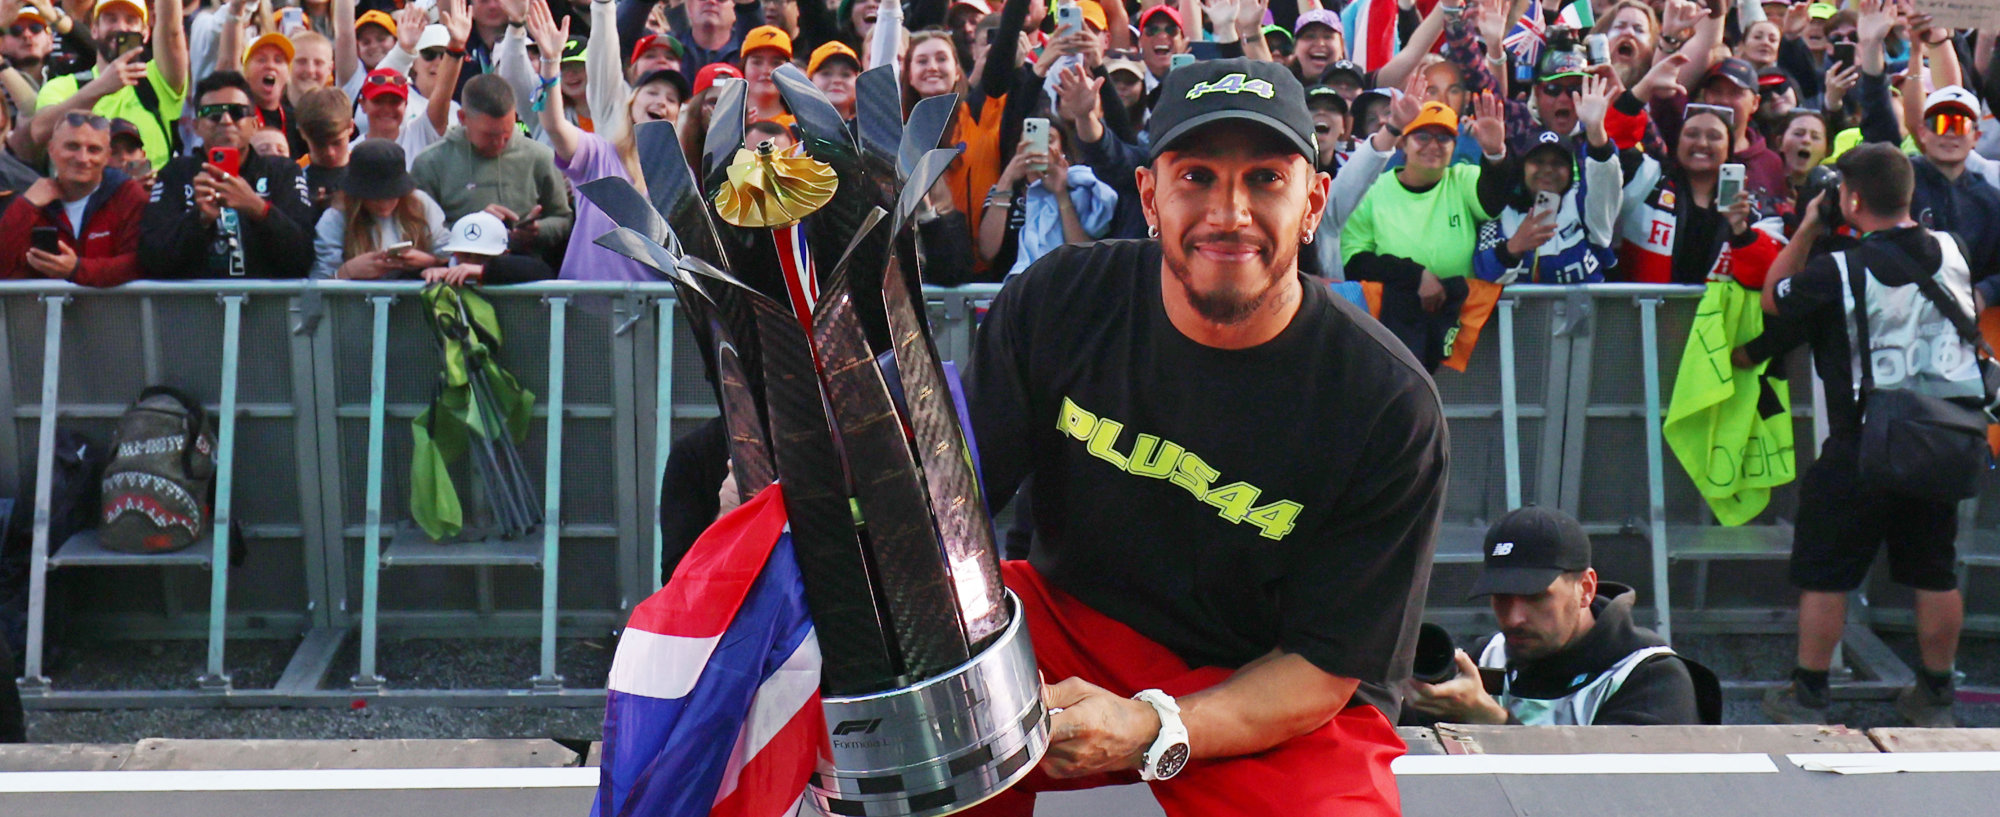 Sir Lewis Hamilton poses with the Silverstone crowd, holding his trophy after a historic ninth win at the British Grand Prix. 